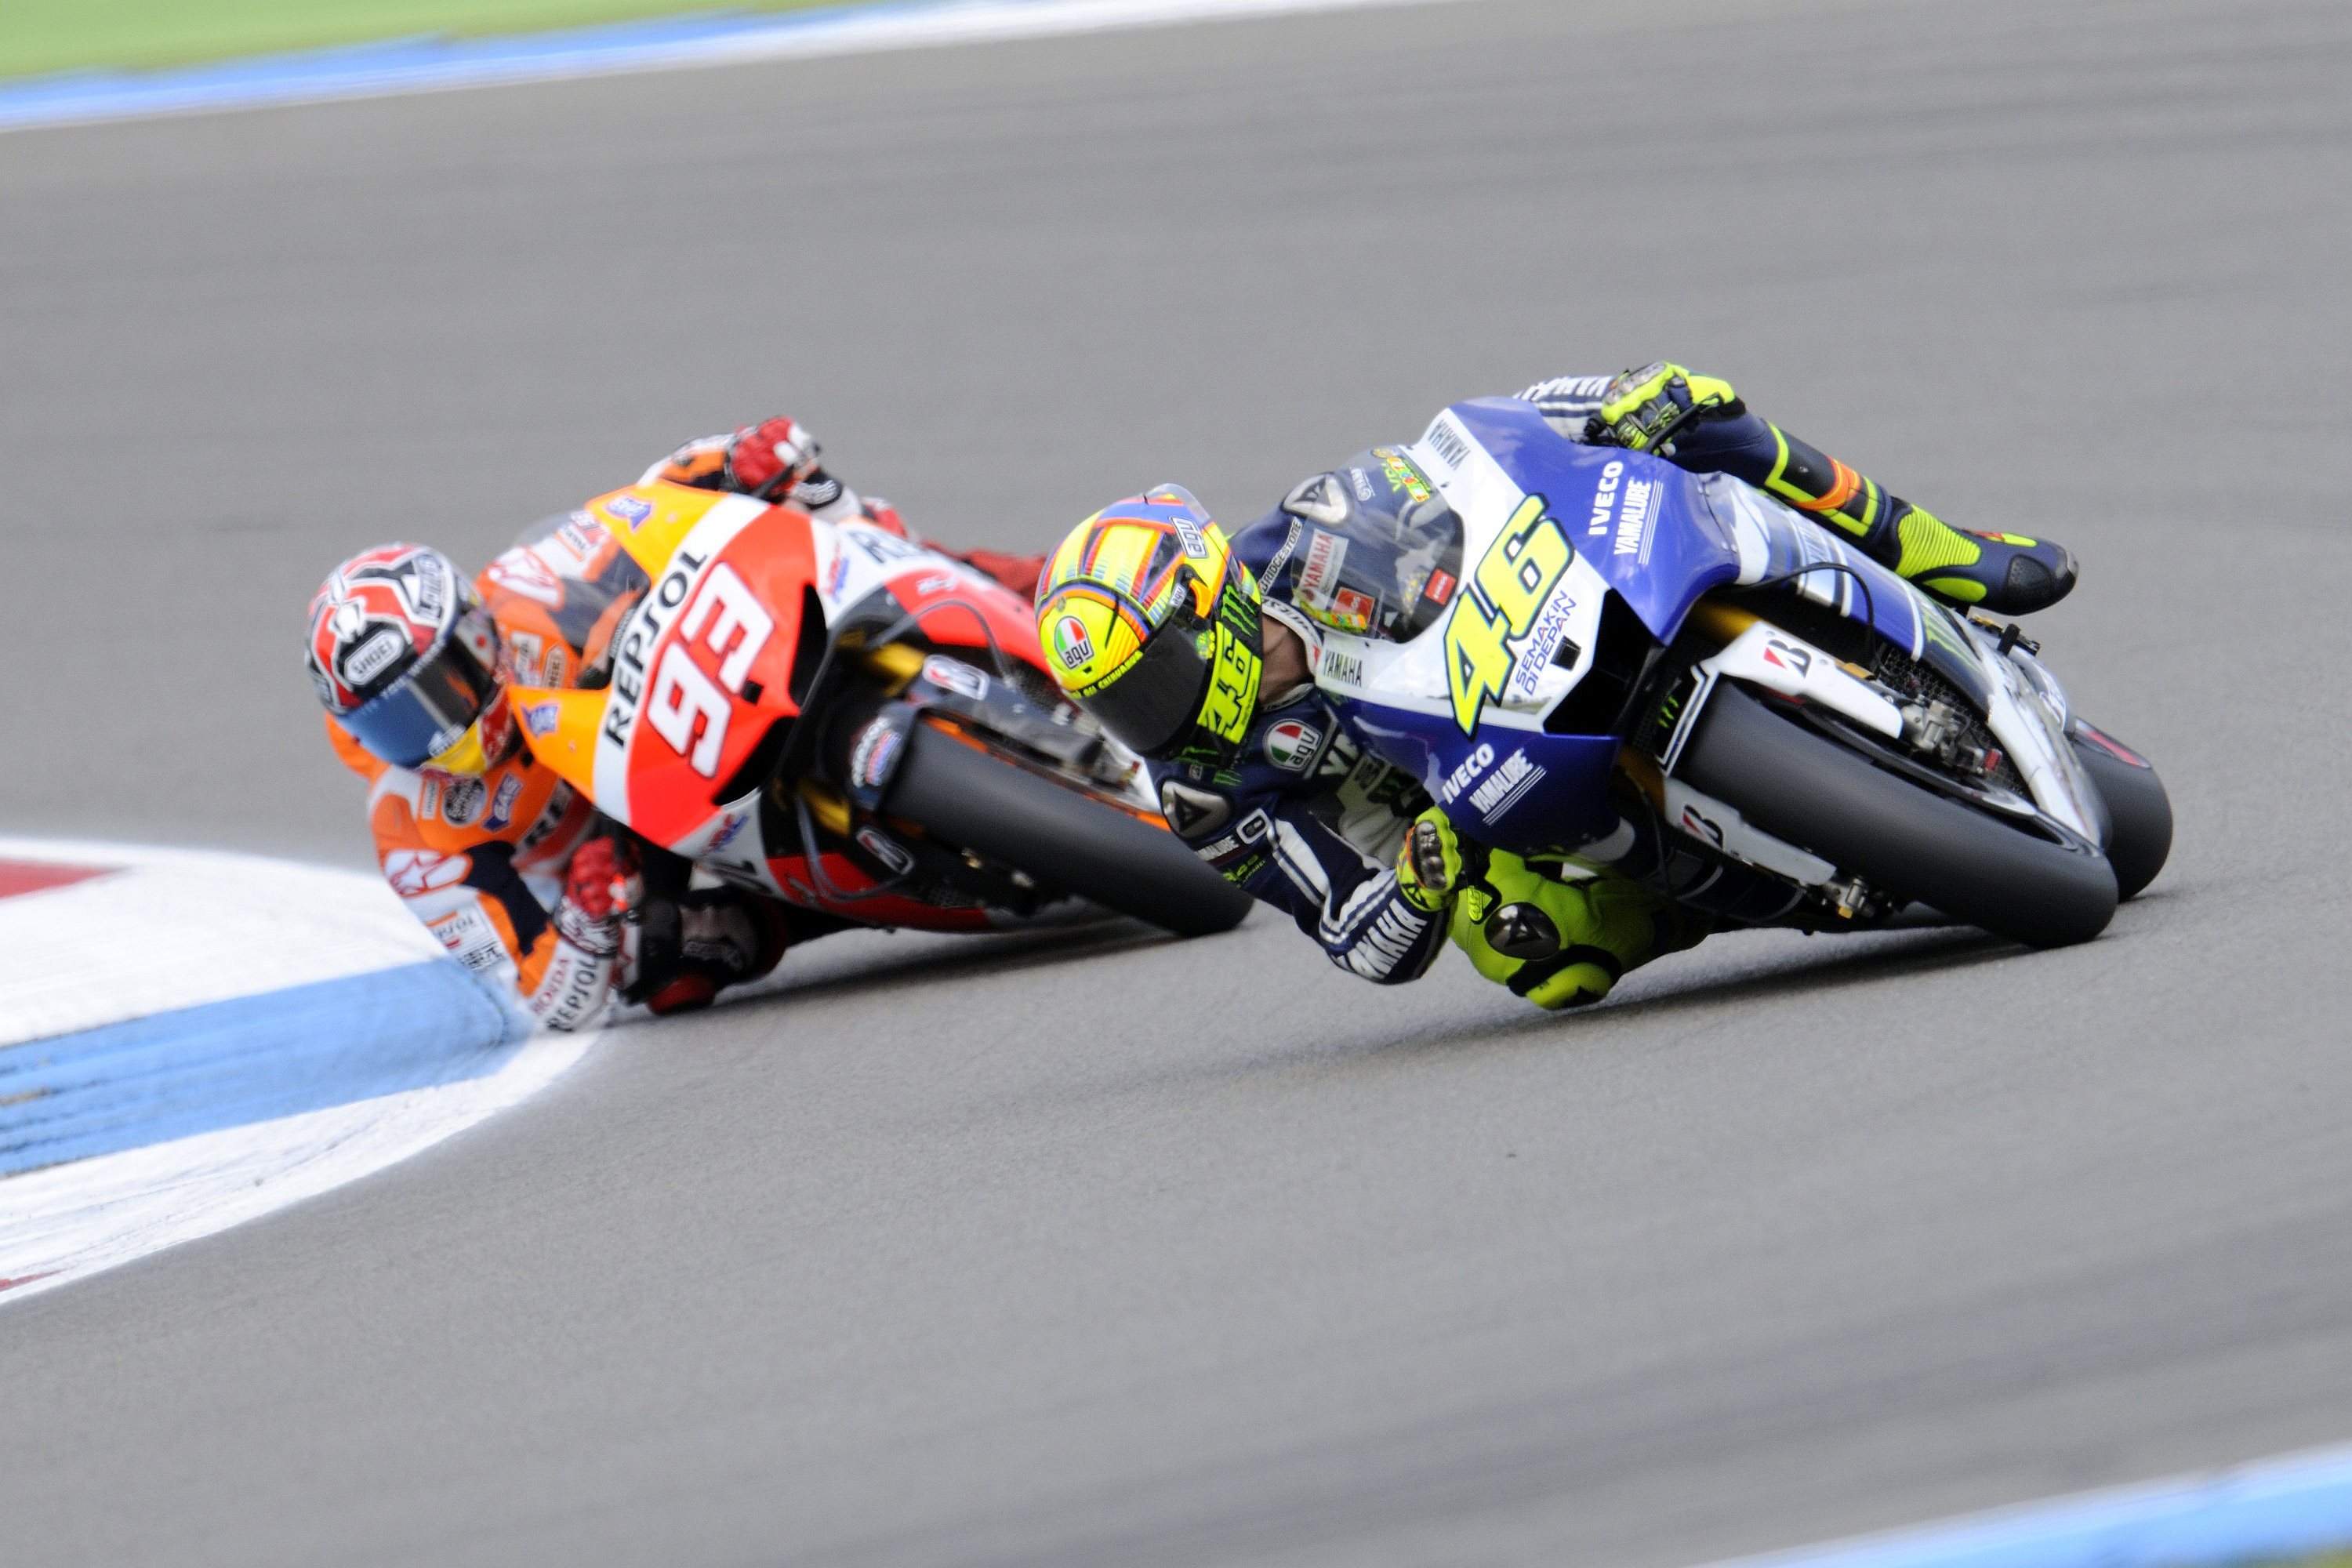 355611 Valentino Rossi 800x533px by Ron Walsey